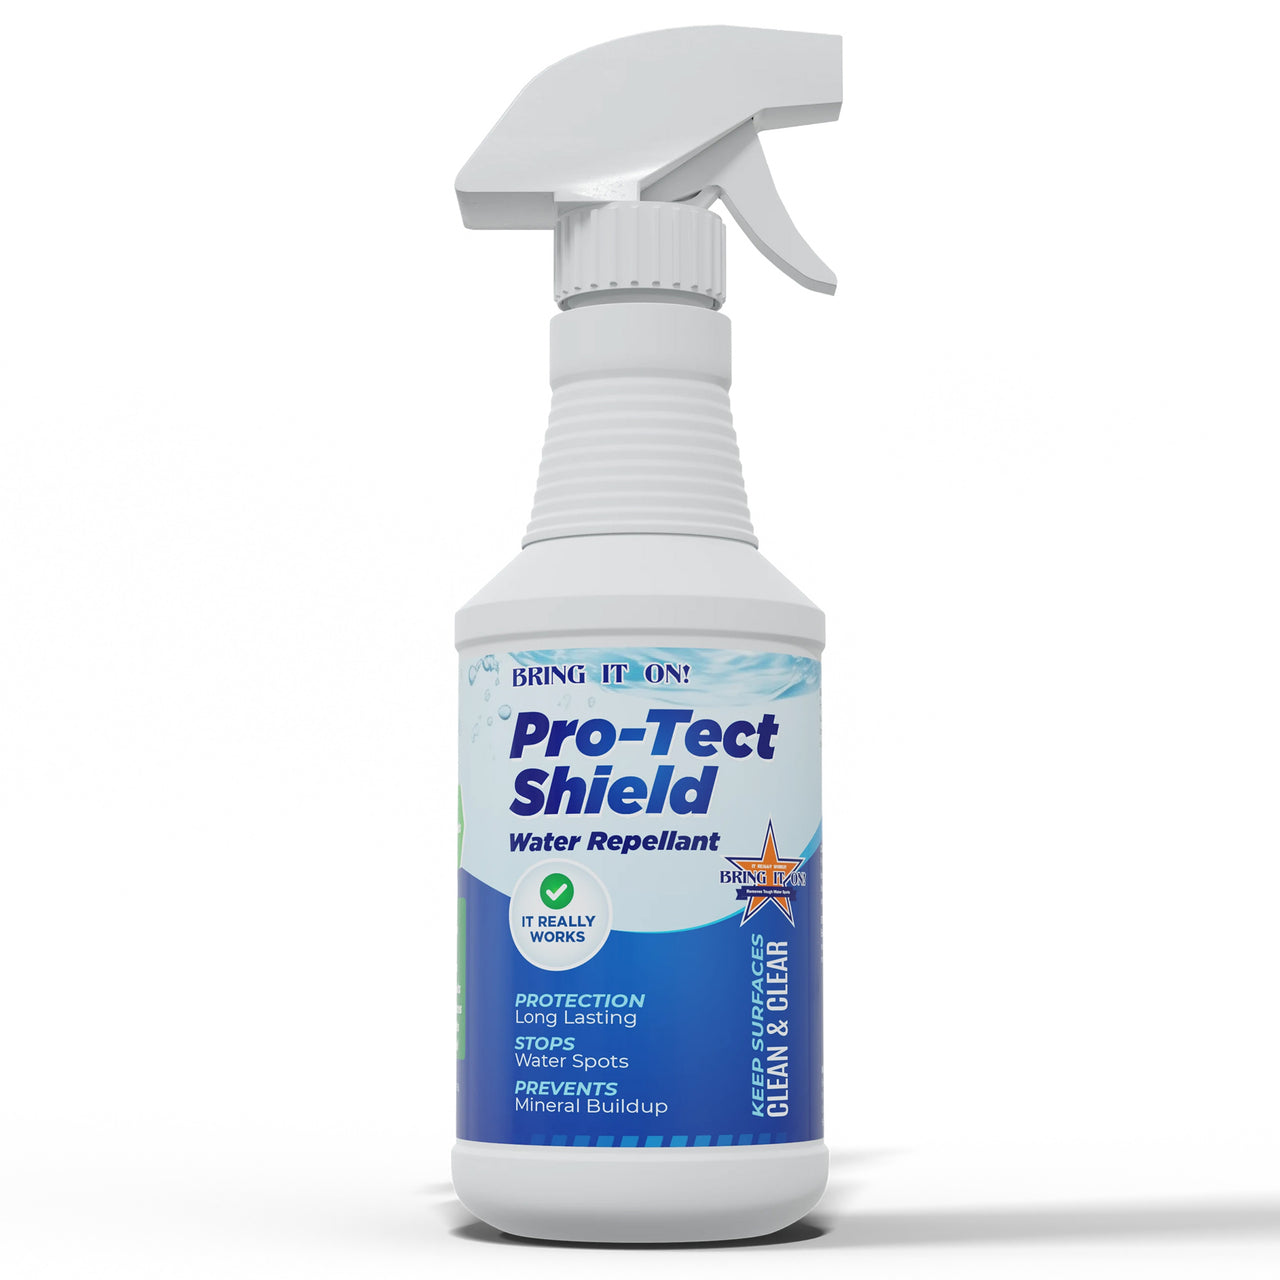 protect shield water repellent